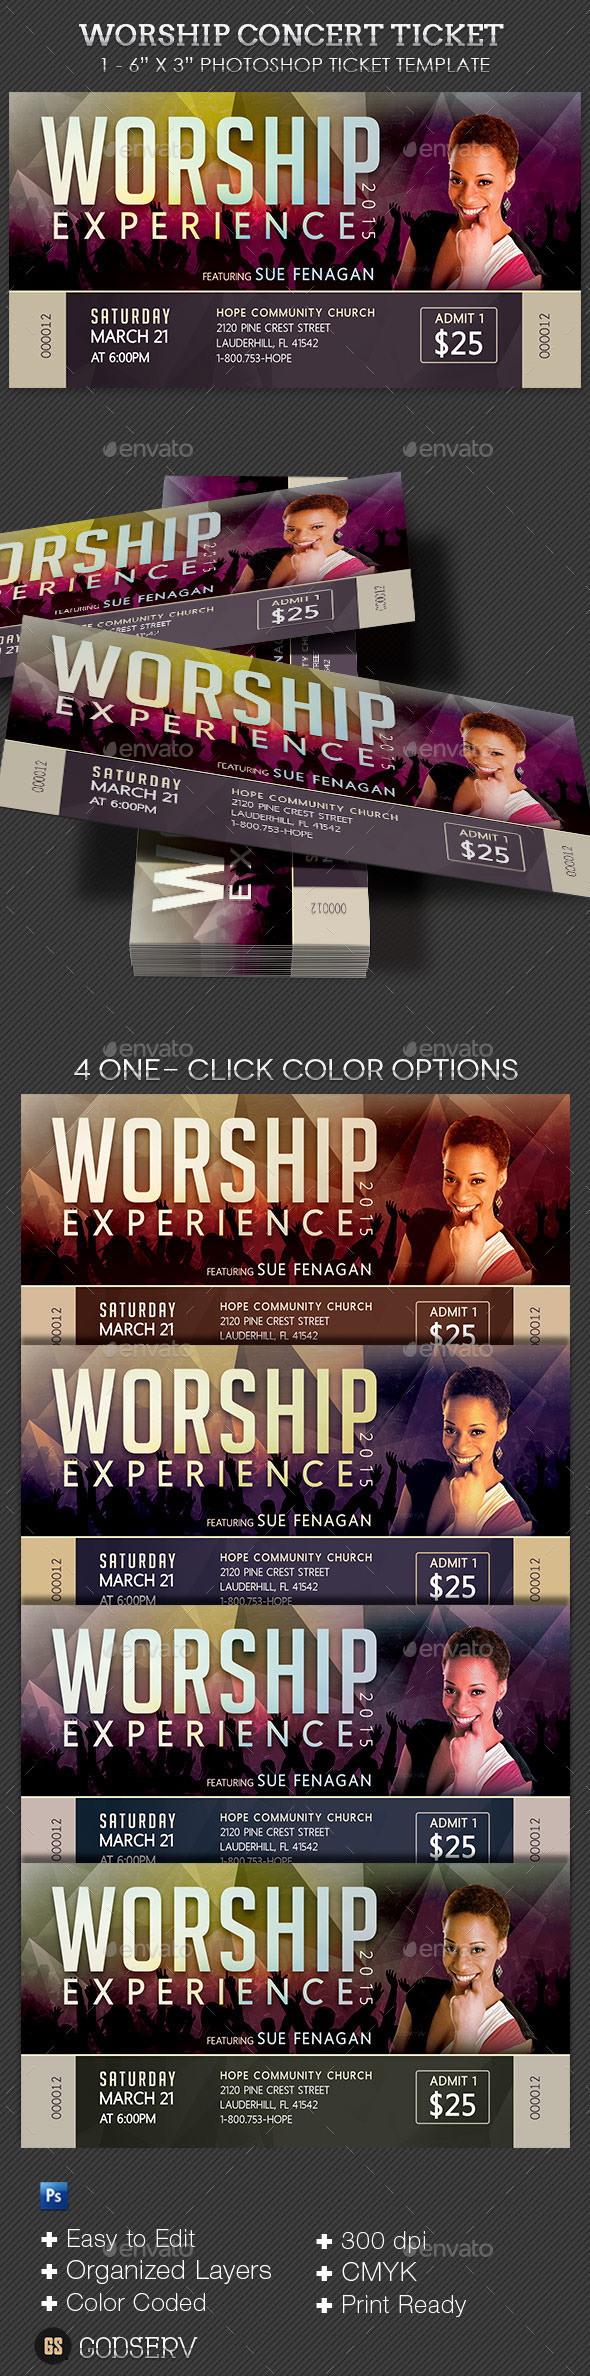 Worship concert ticket template preview